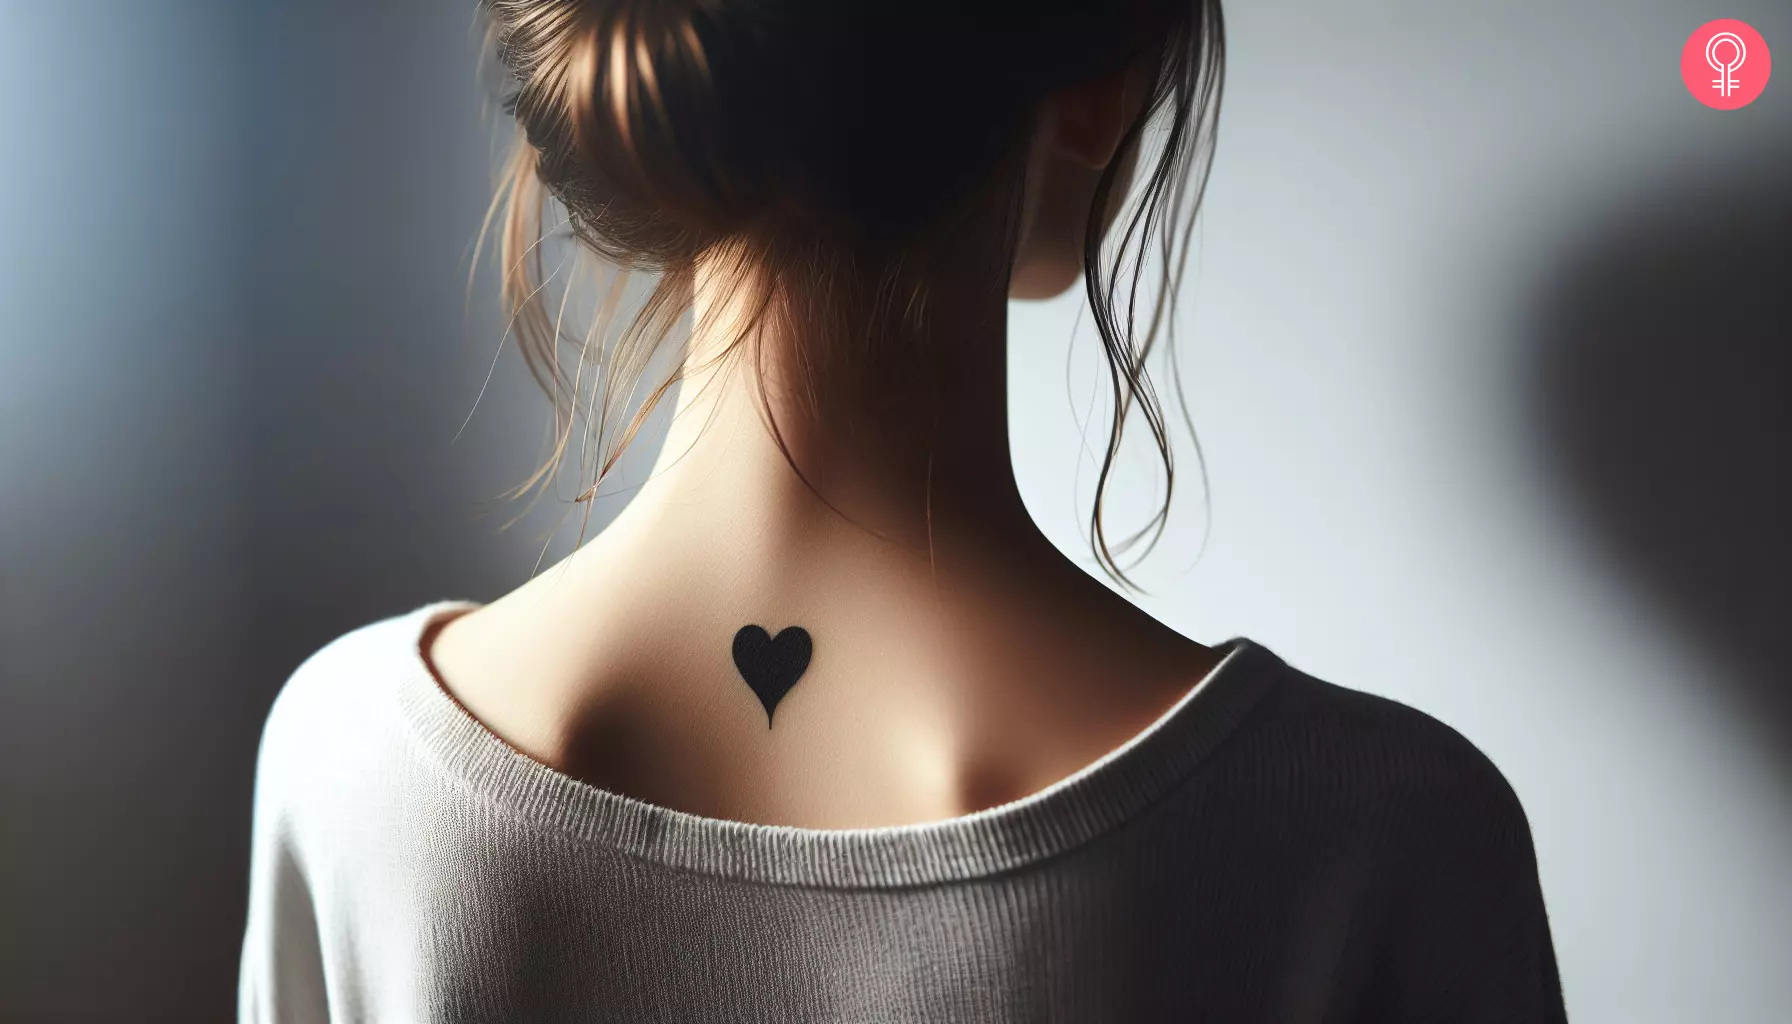 A black heart tattoo on the lower neck